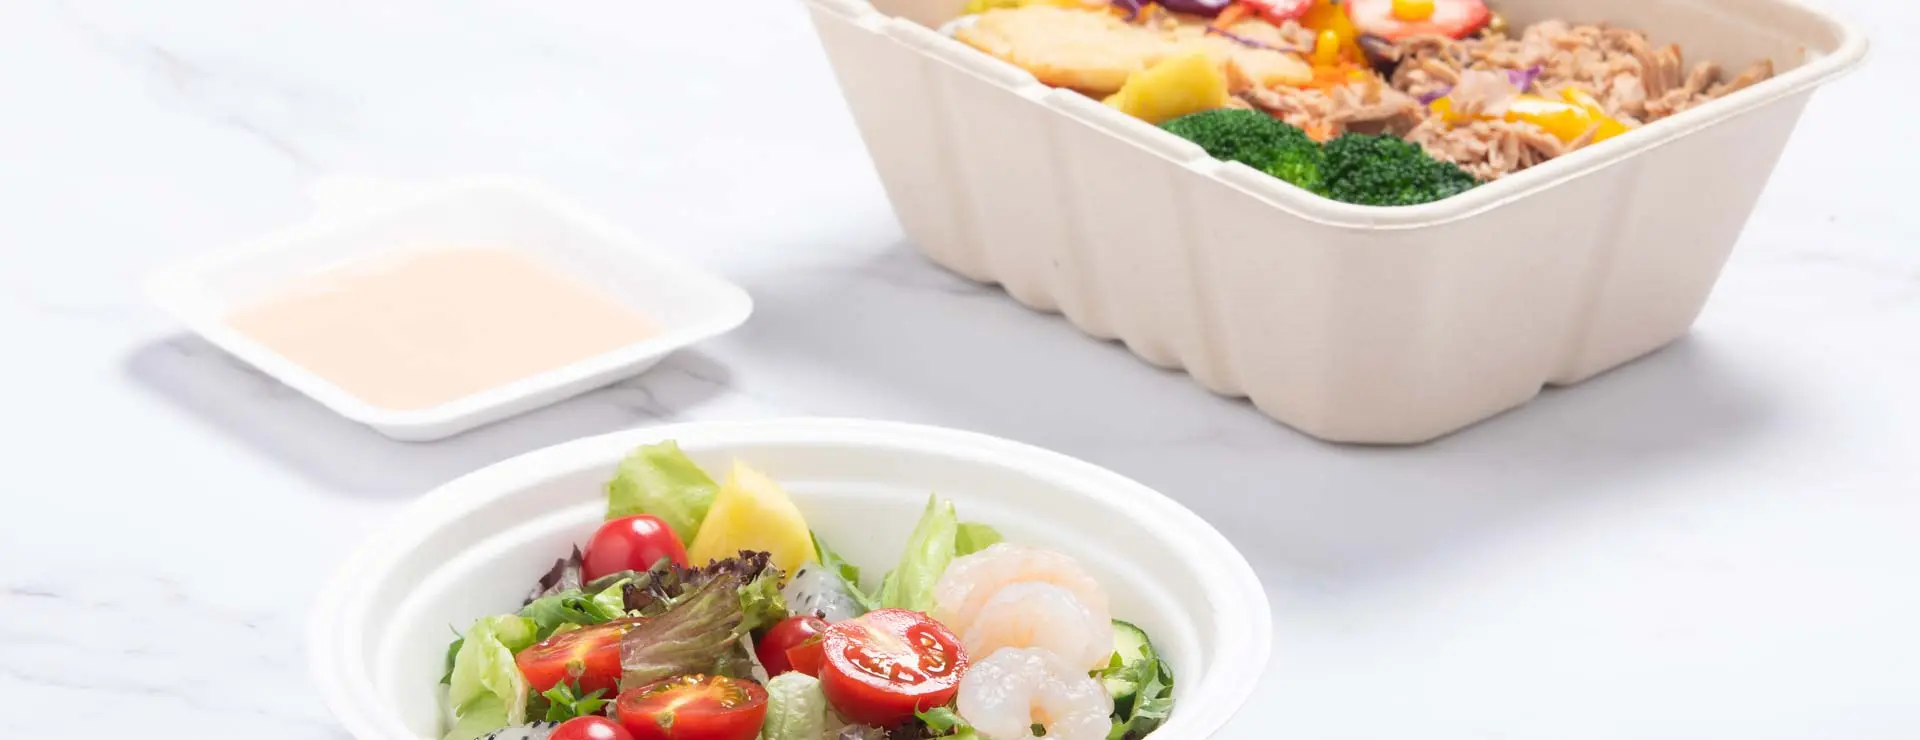 https://www.luzhou-pack.com/uploads/image/20230324/15/luzhou-pack-is-a-leading-manufacturer-of-compostable-bowls.-our-products-are-made-from-plant-based-materials-and-are-a-more-sustainable-alternative-to-conventional-plastic-and-plastic-coated-bowls.webp